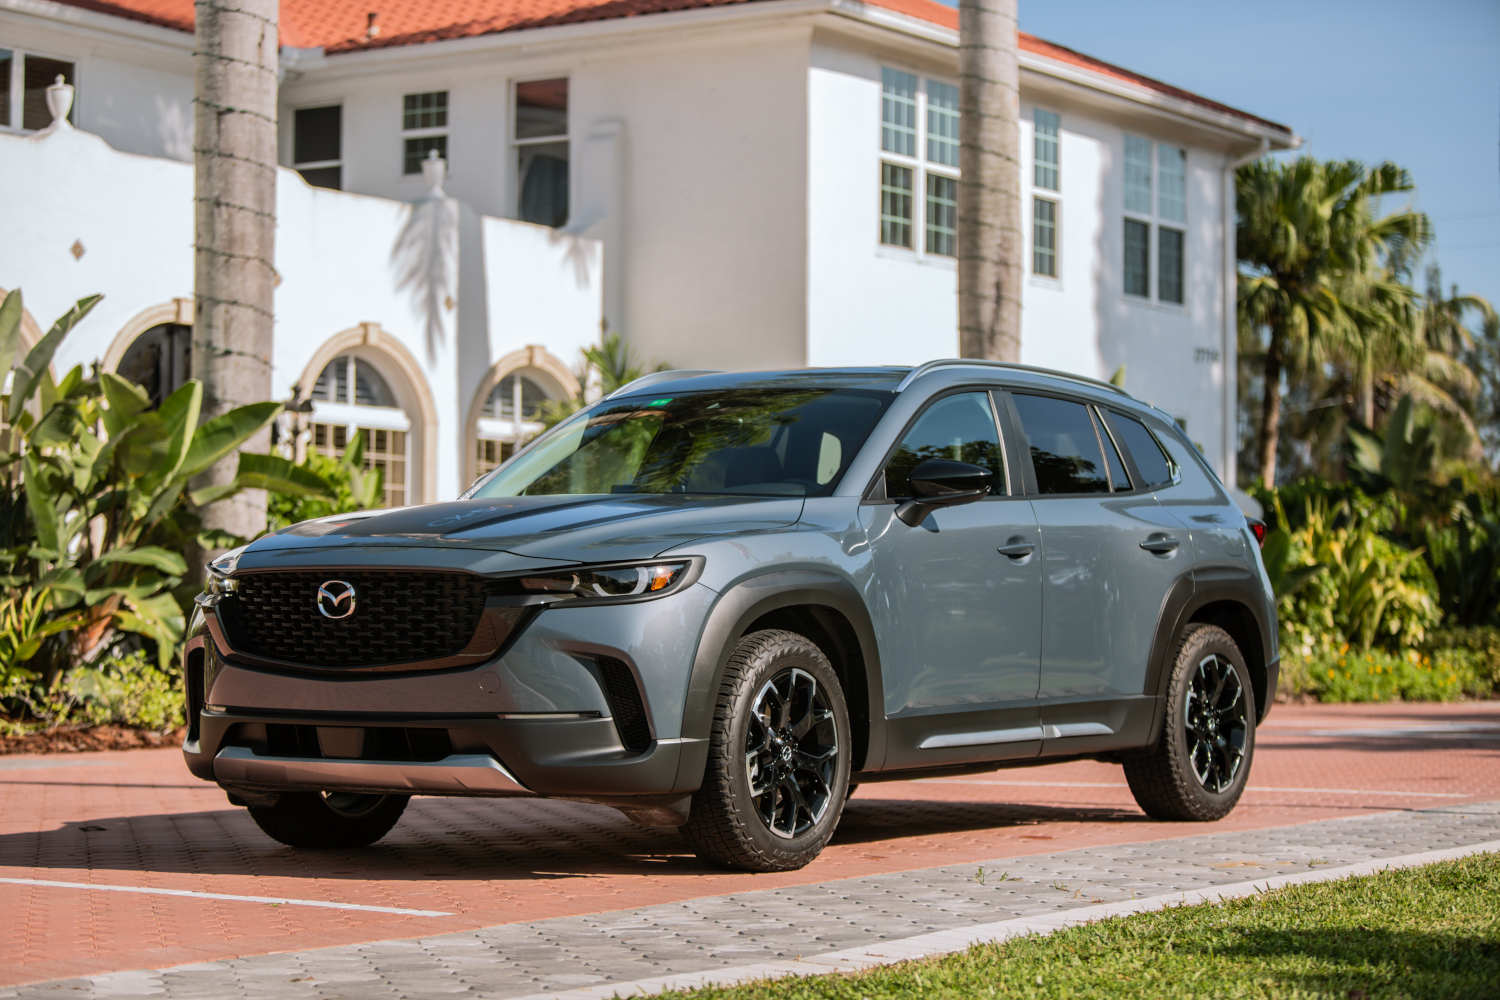 The best small SUVs of 2023 include this Mazda CX-50